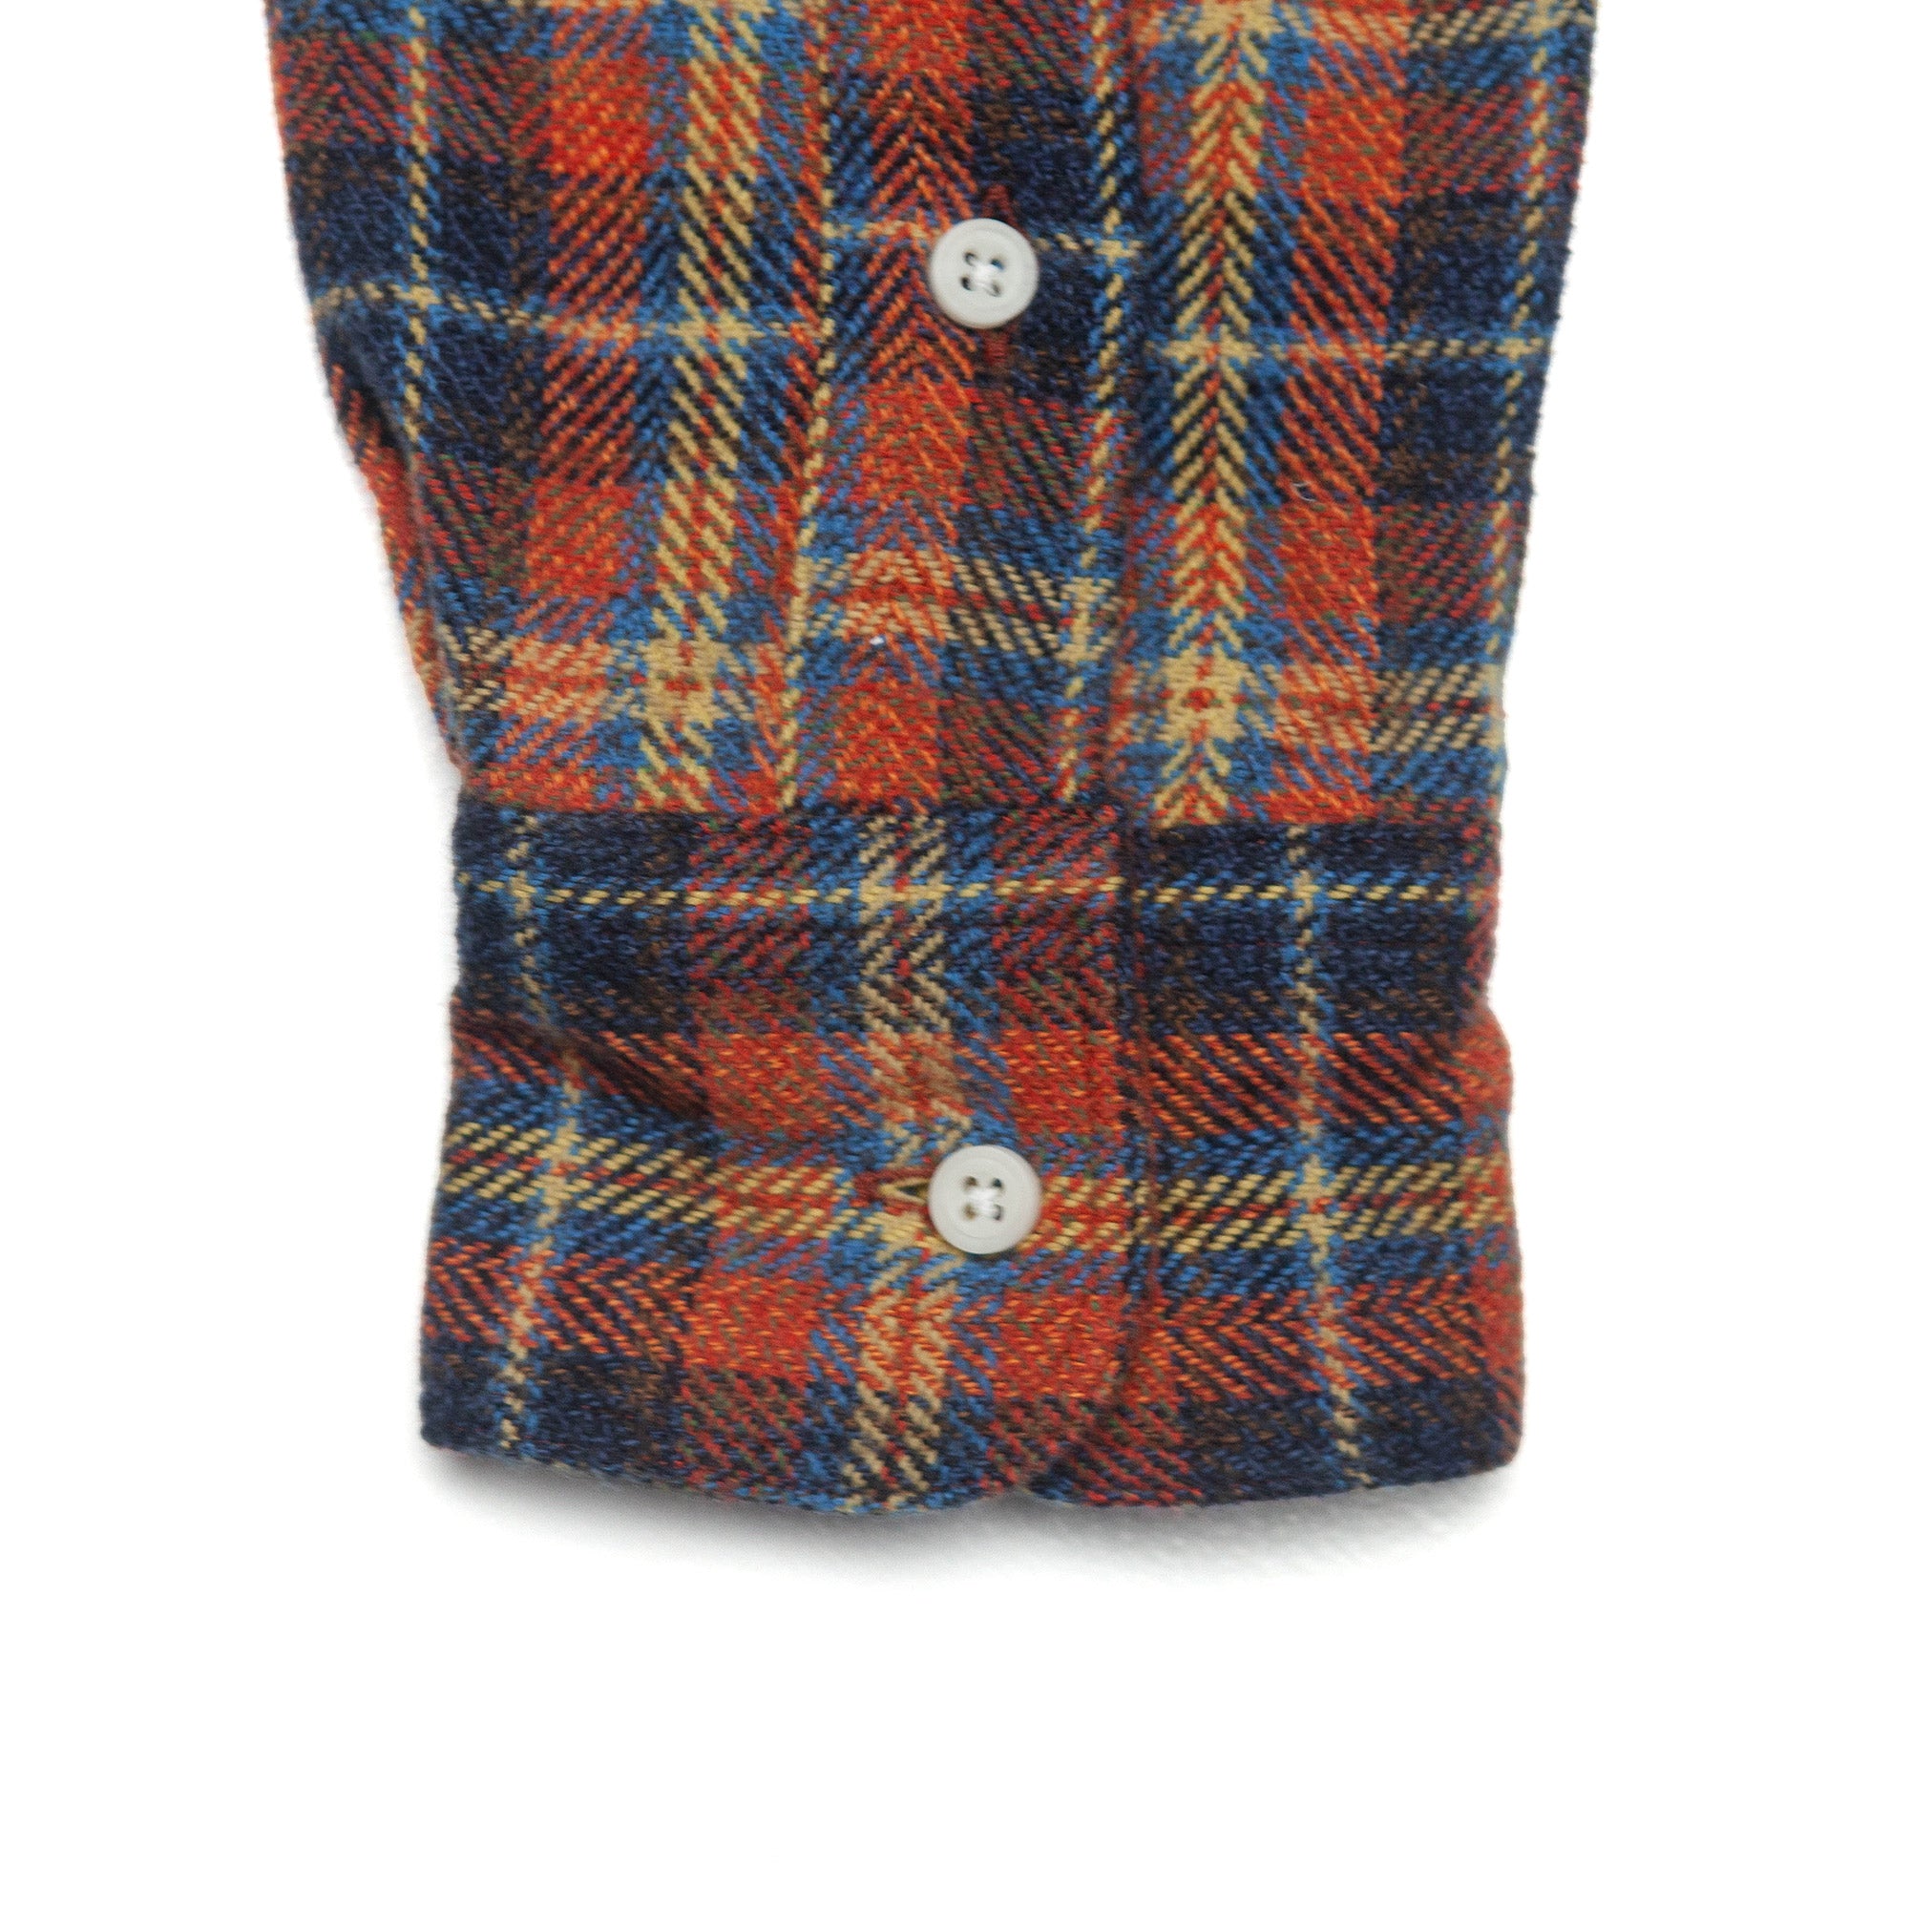 Red Cotton Tweed Check Shirt